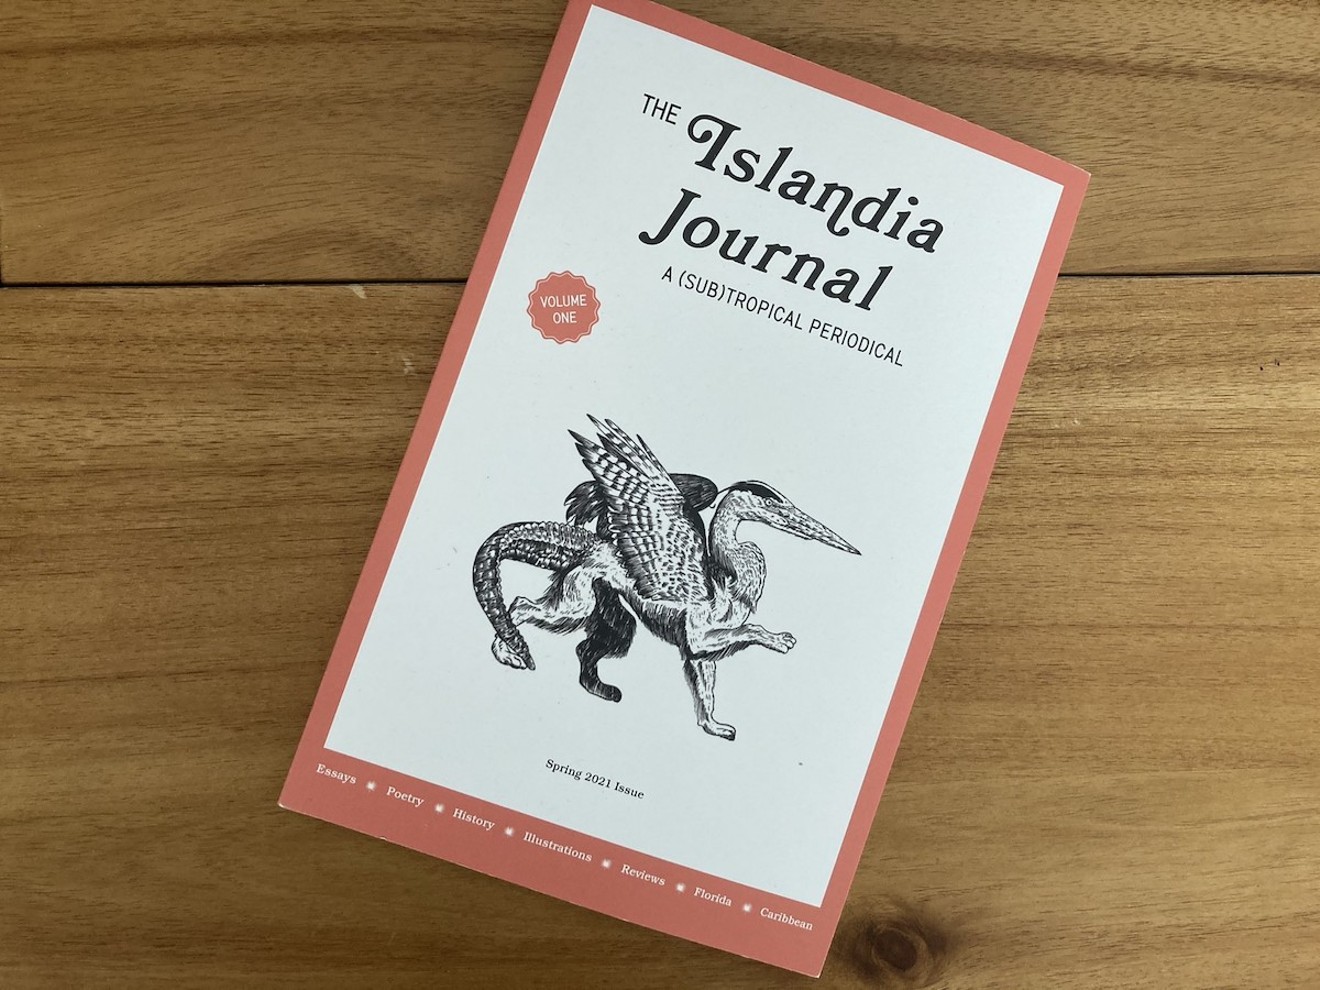 The first edition of The Islandia Journal is available at select retailers in Miami.